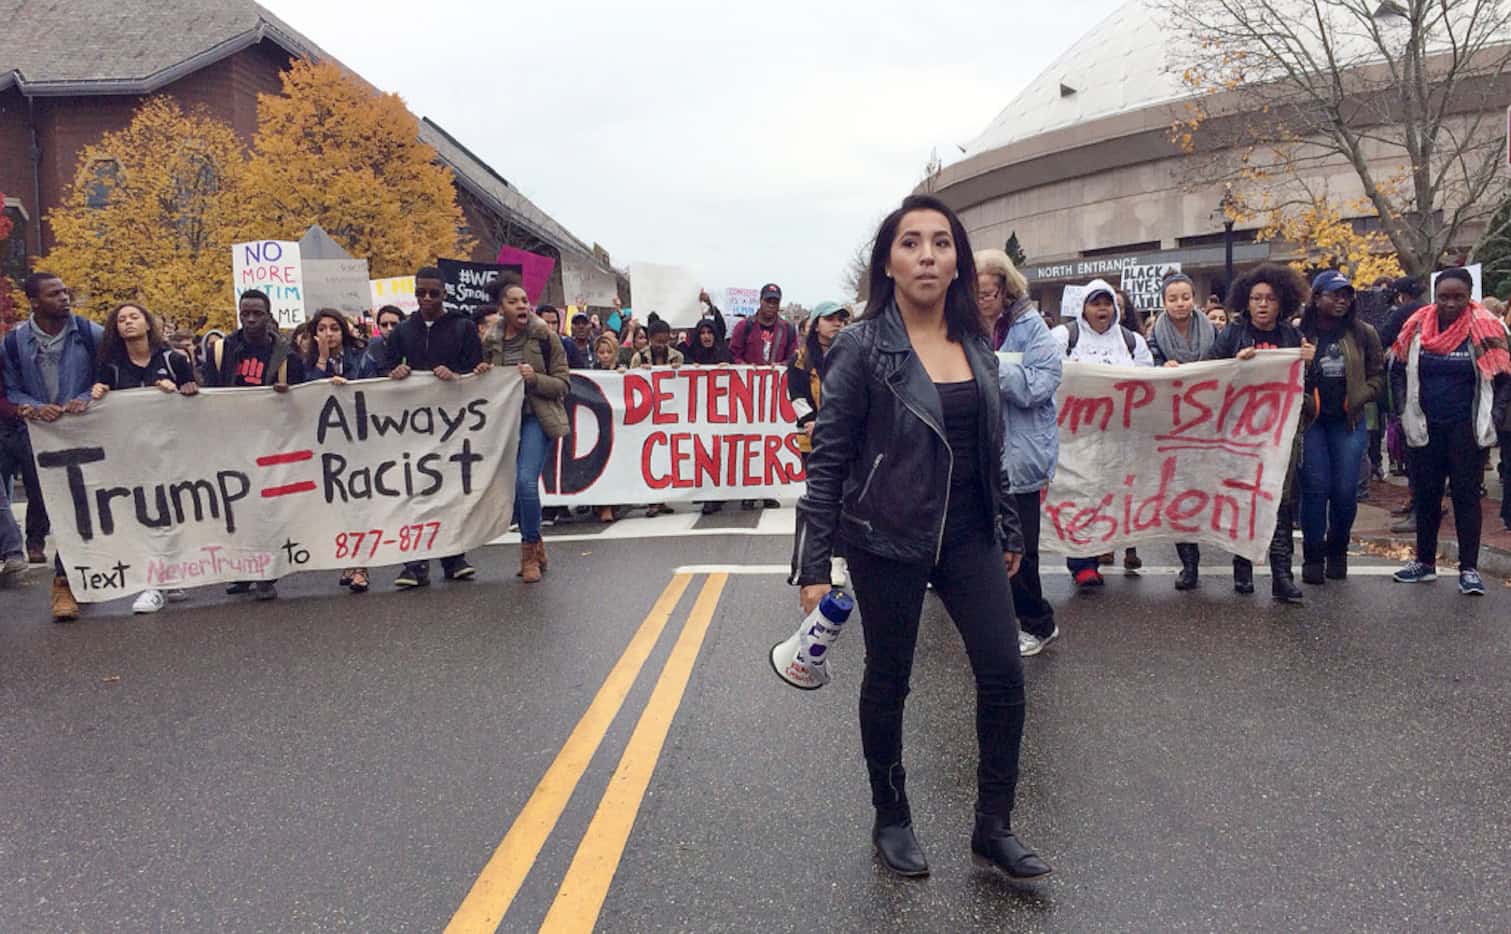 Joseline Tlacomulco leads several hundred people in a march on the University of Connecticut...